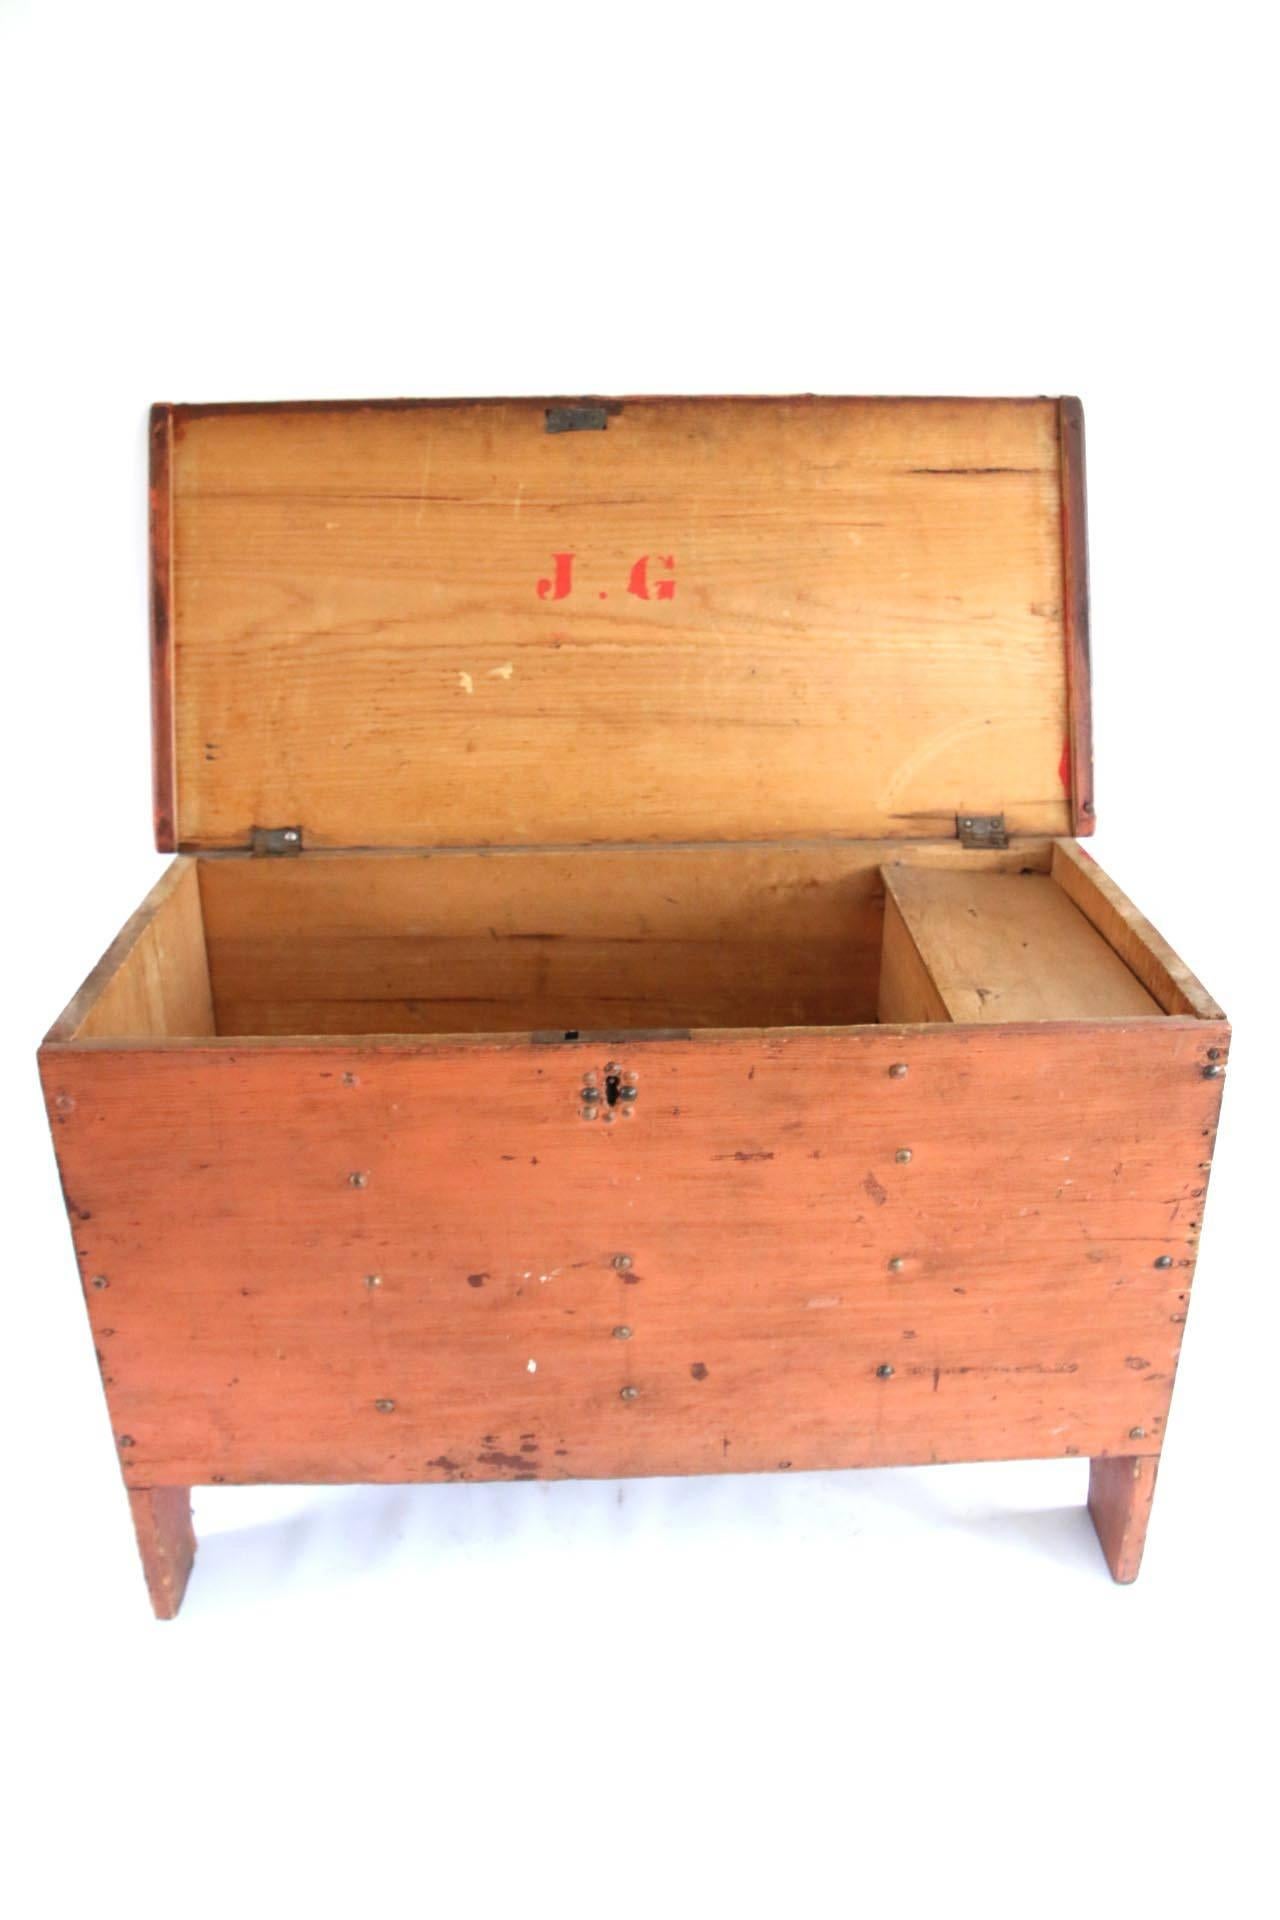 Early 19th Century Child's Painted Blanket Chest In Good Condition For Sale In Woodbury, CT